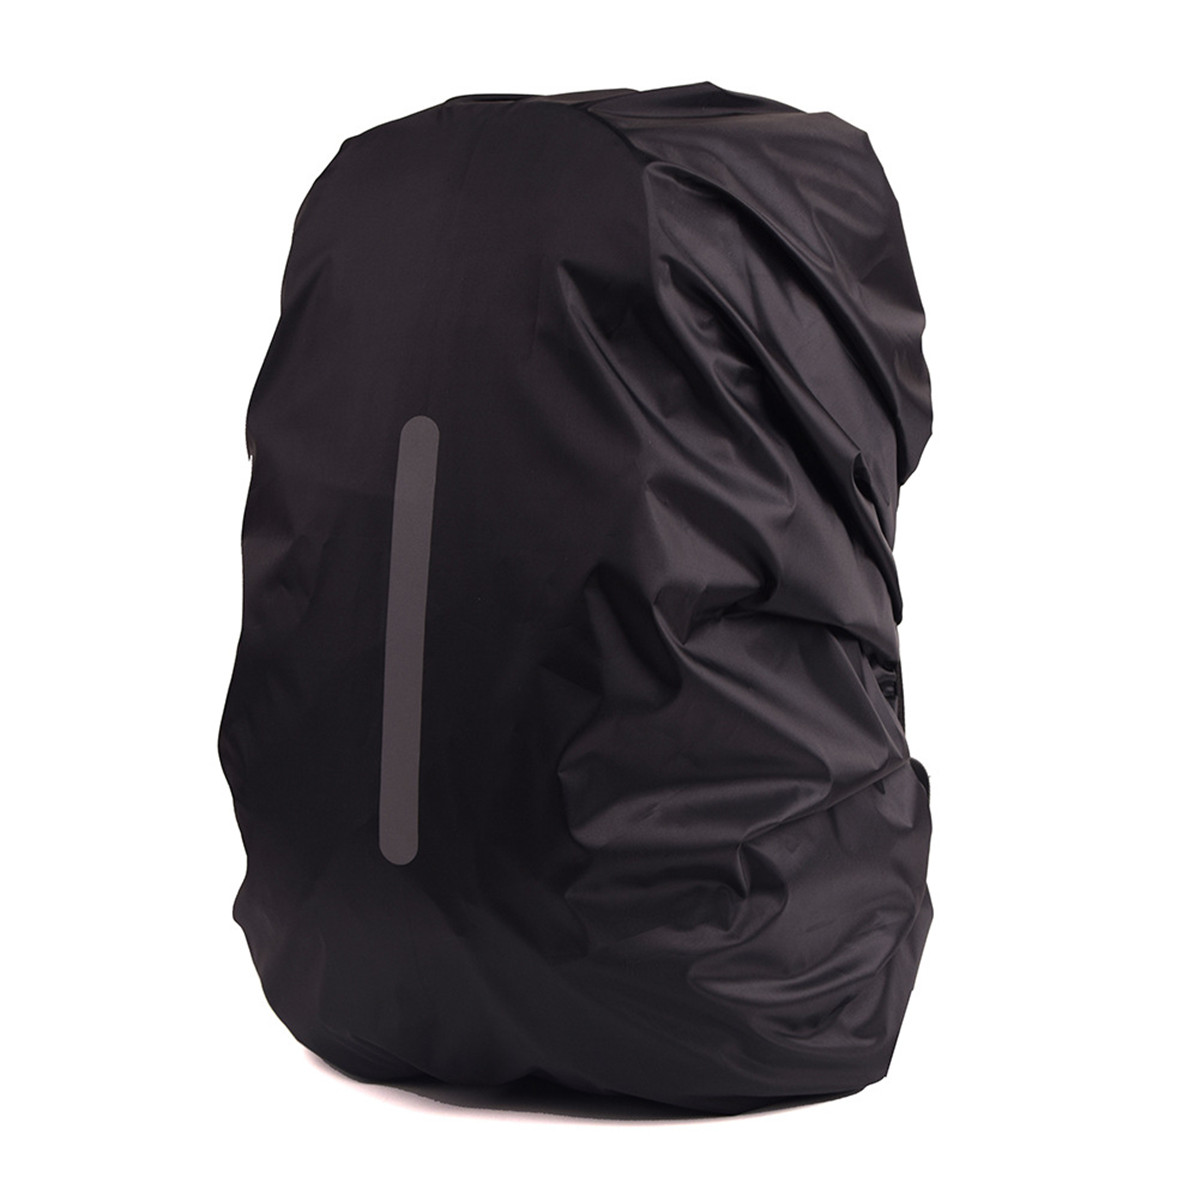 Portable-Outdoor-Backpack-Waterproof-Dust-Cover-Travel-Backpack-Rain-Cover-Hiking-Camping-Sports-Acc-1790124-8